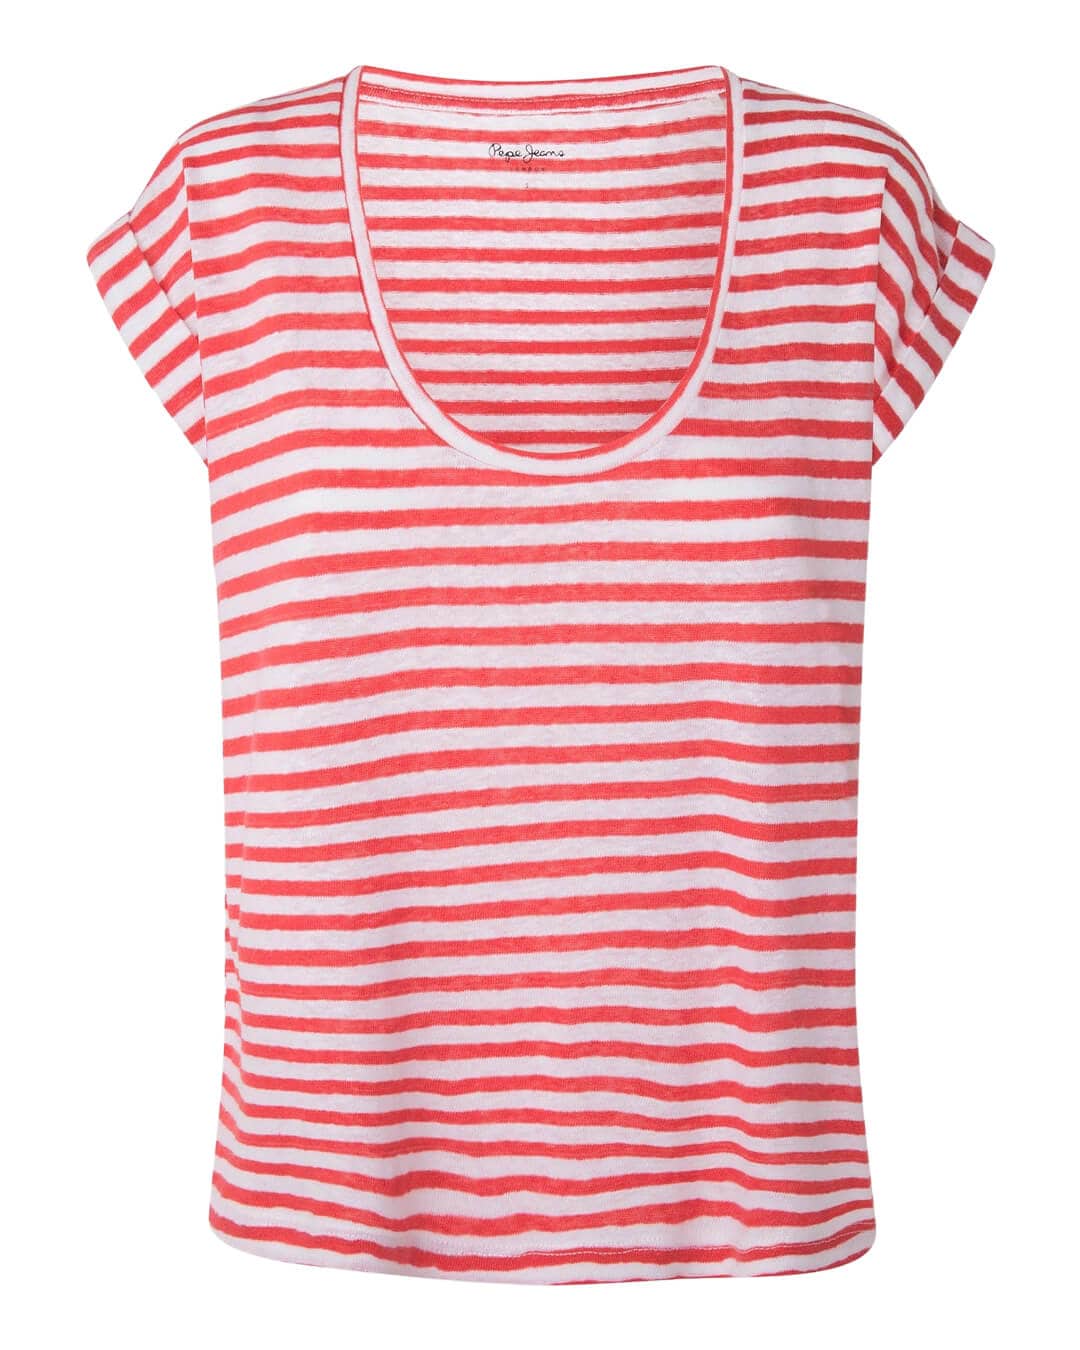 Pepe Jeans T-Shirts Pepe Jeans Red Striped Print T-Shirt